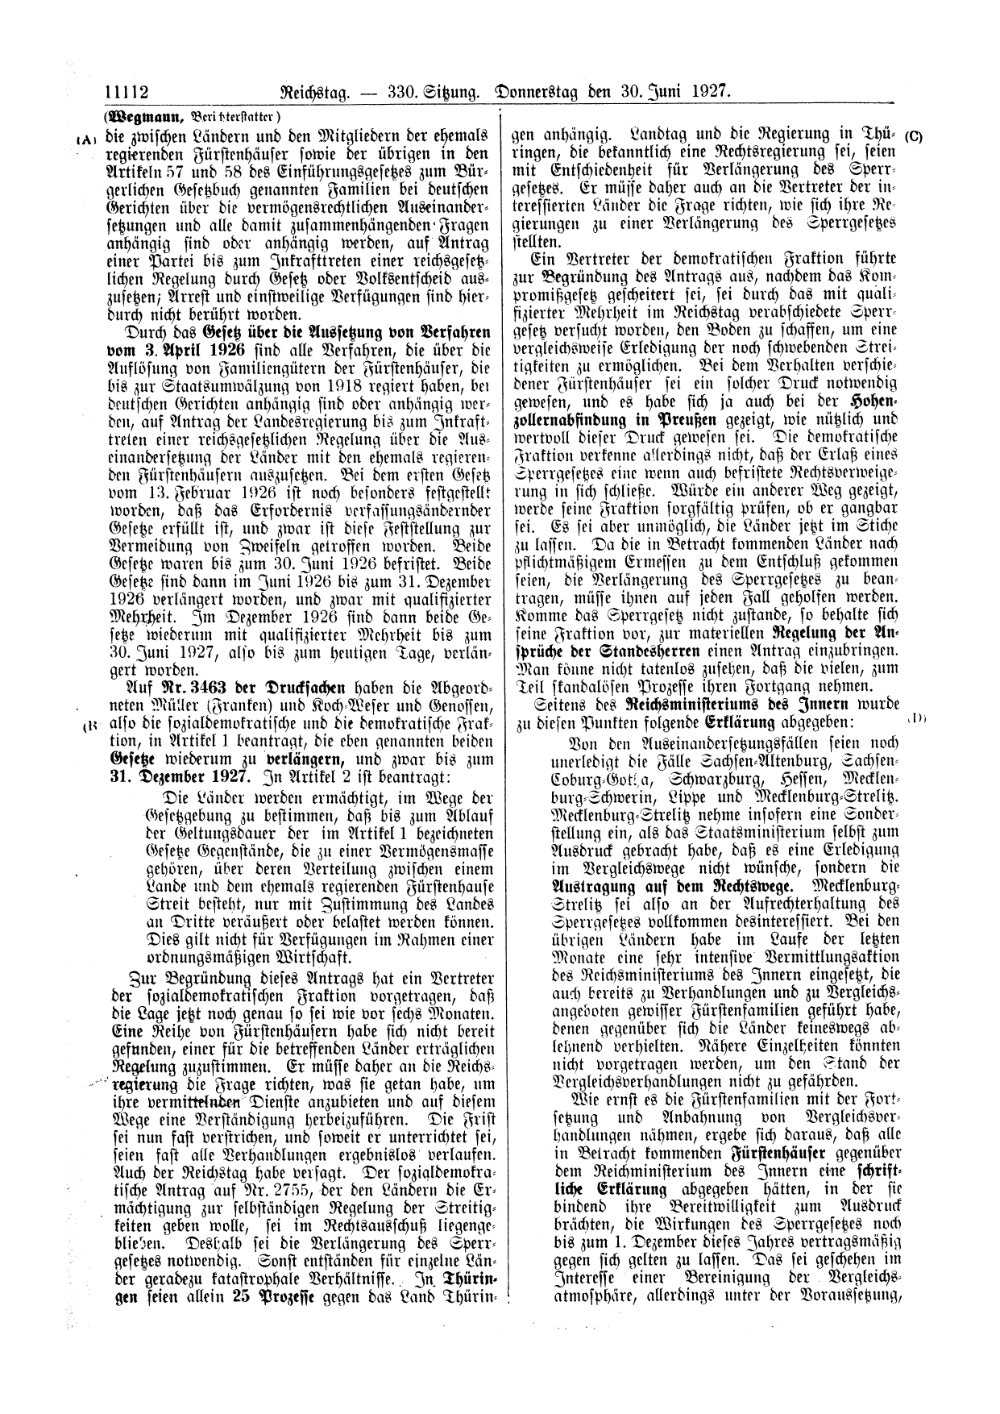 Scan of page 11112